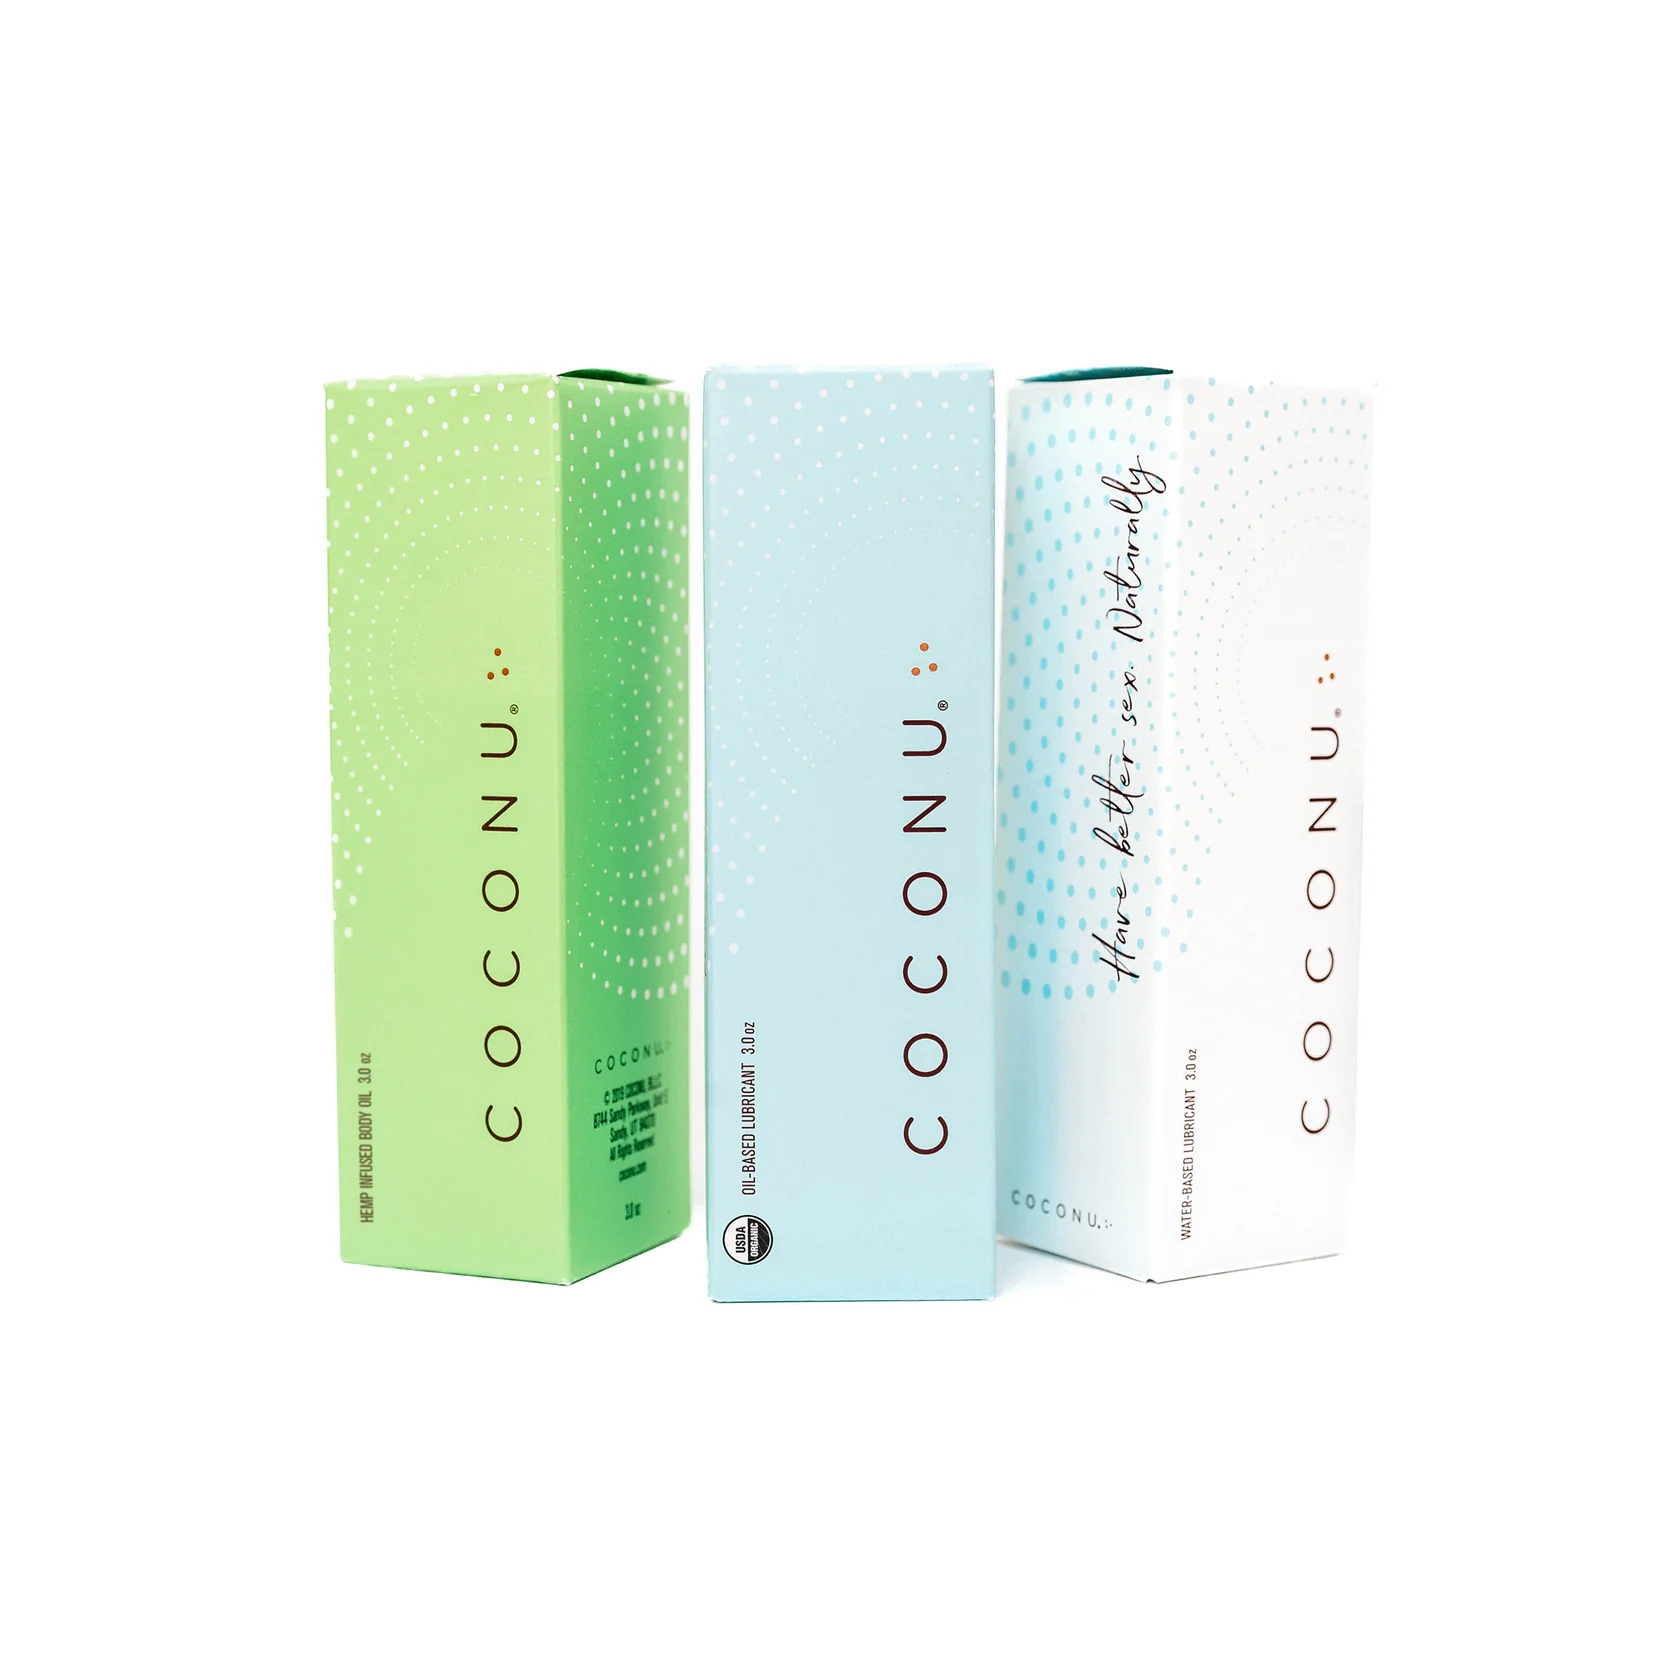 Coconu intimacy gift set is a box of three (white, blue, and green) clean personal lubricants and the best lube